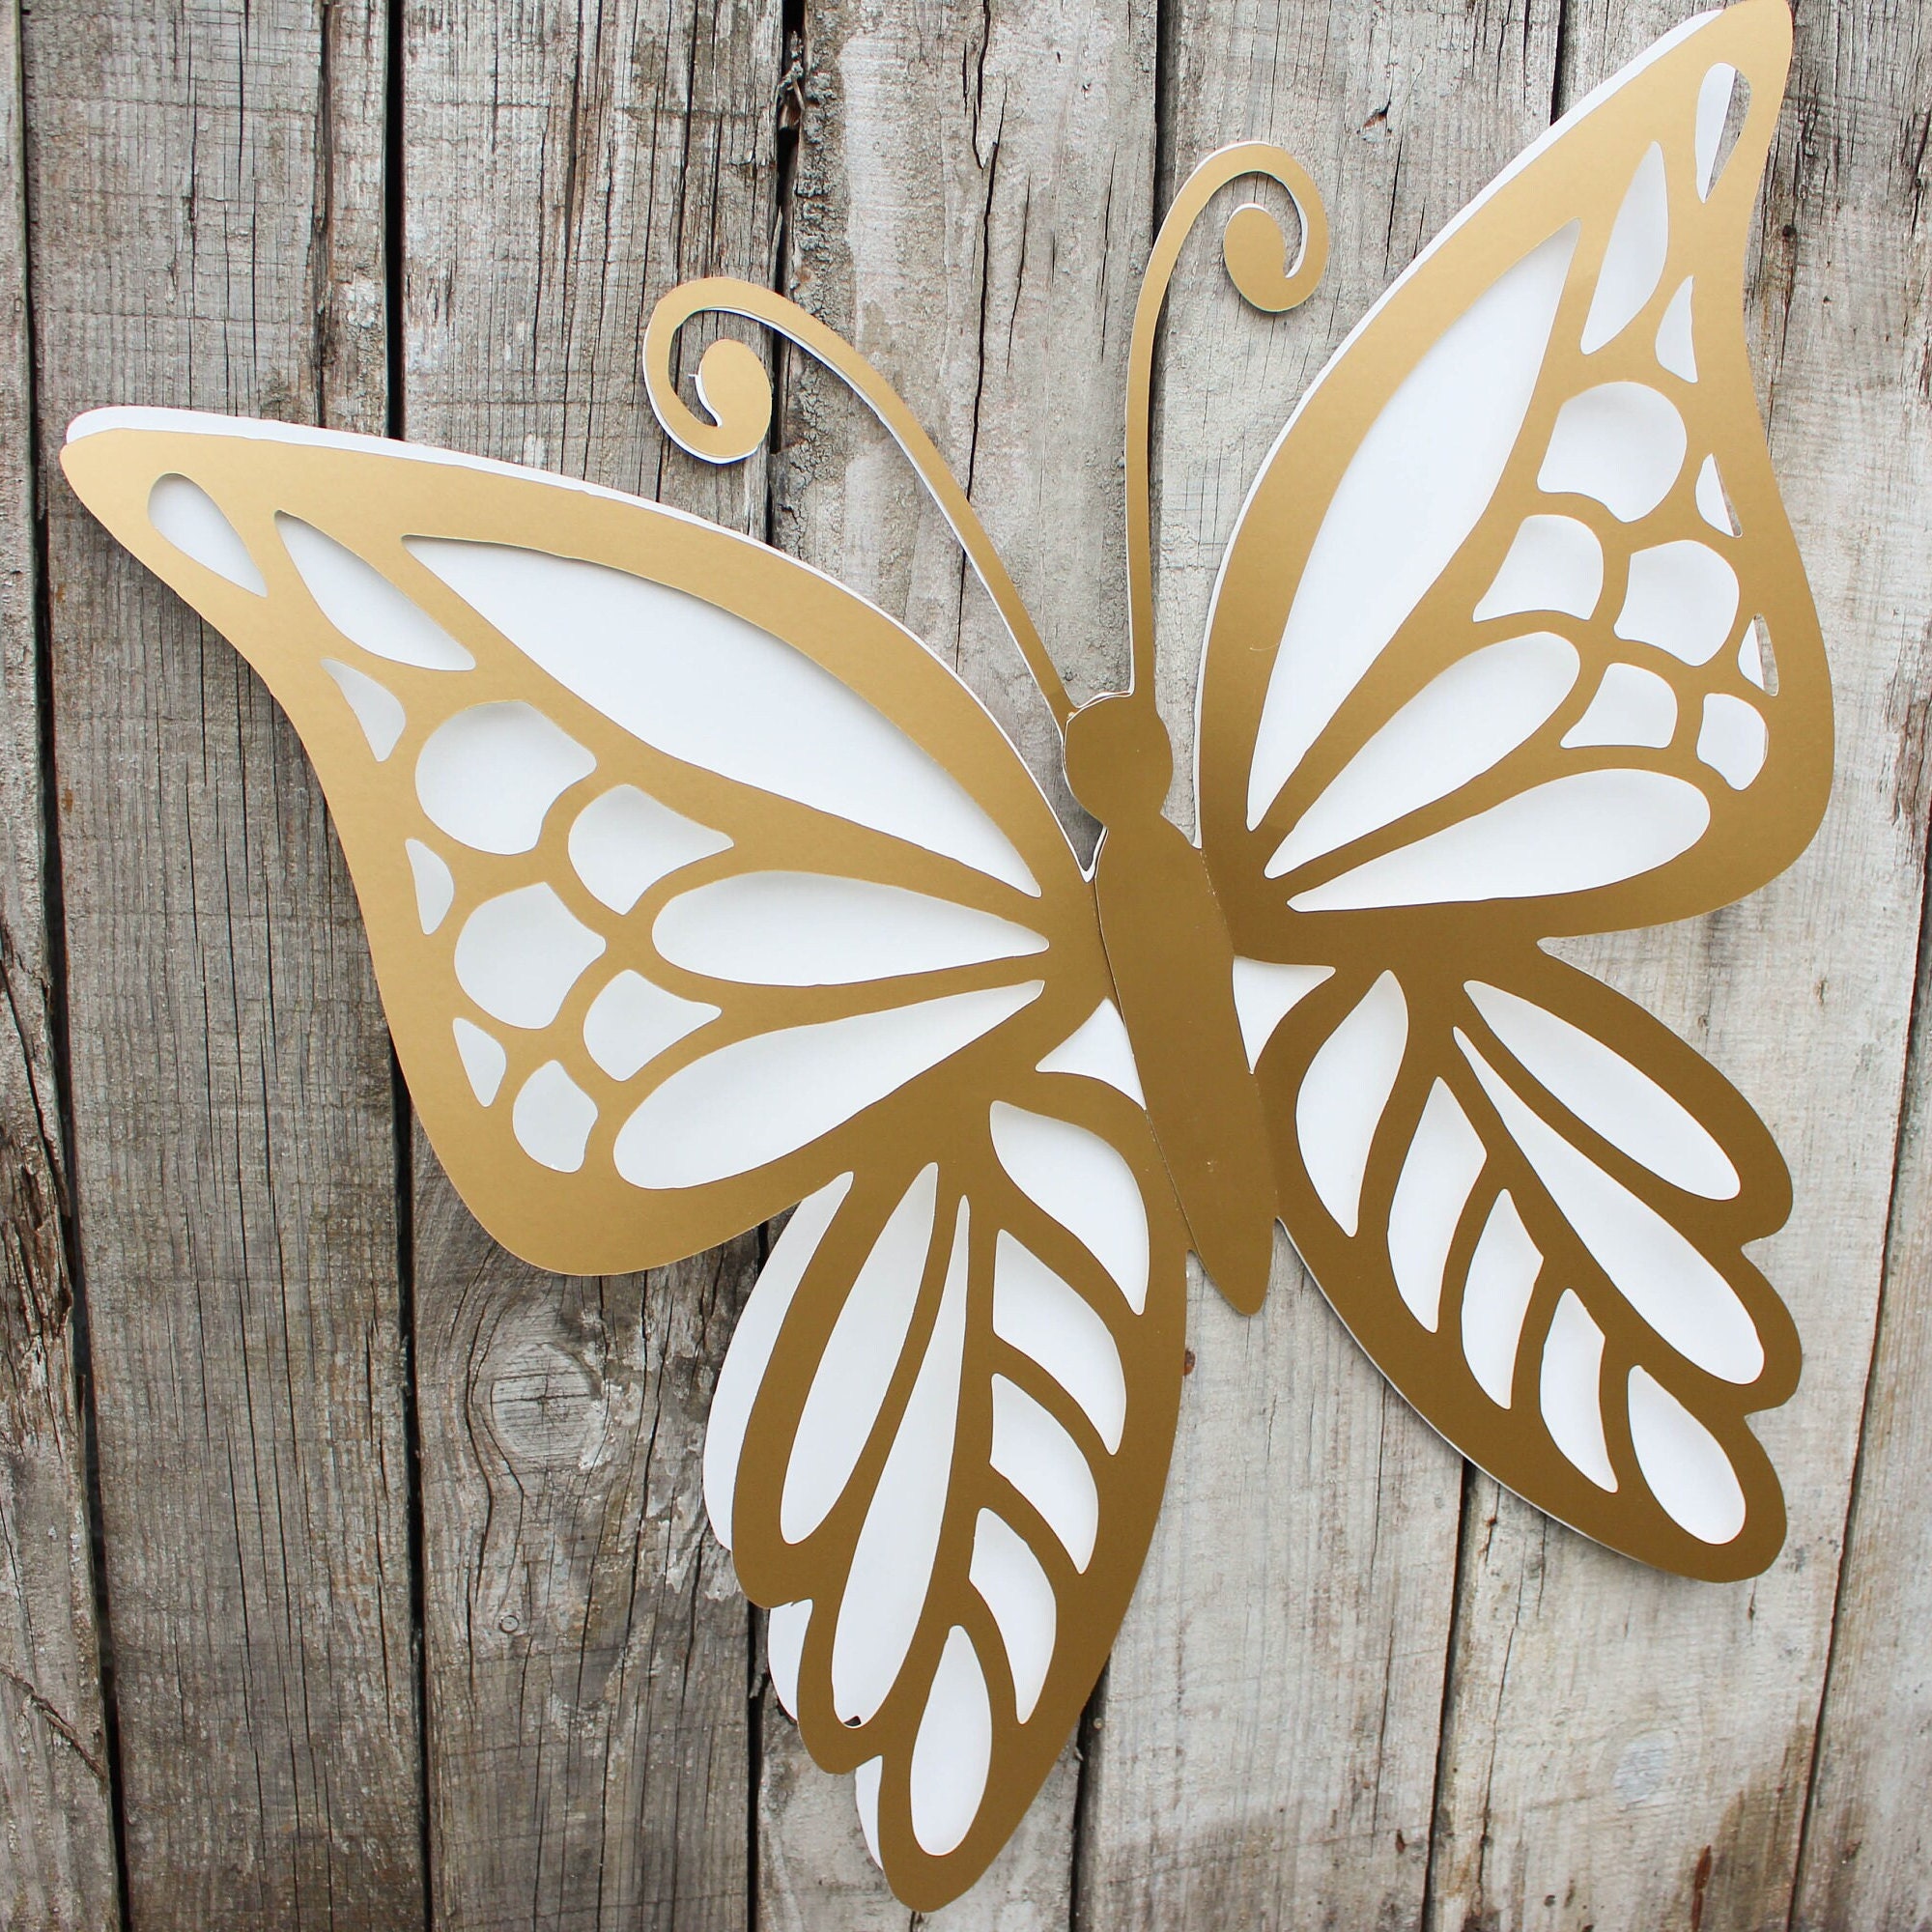 3D Paper Butterfly Wall Decor, Nursery Decor, Bedroom Wall Decor, Birthday  Backdrops, Paper Wall Butterflies, Cake Decorations, Butterfly 